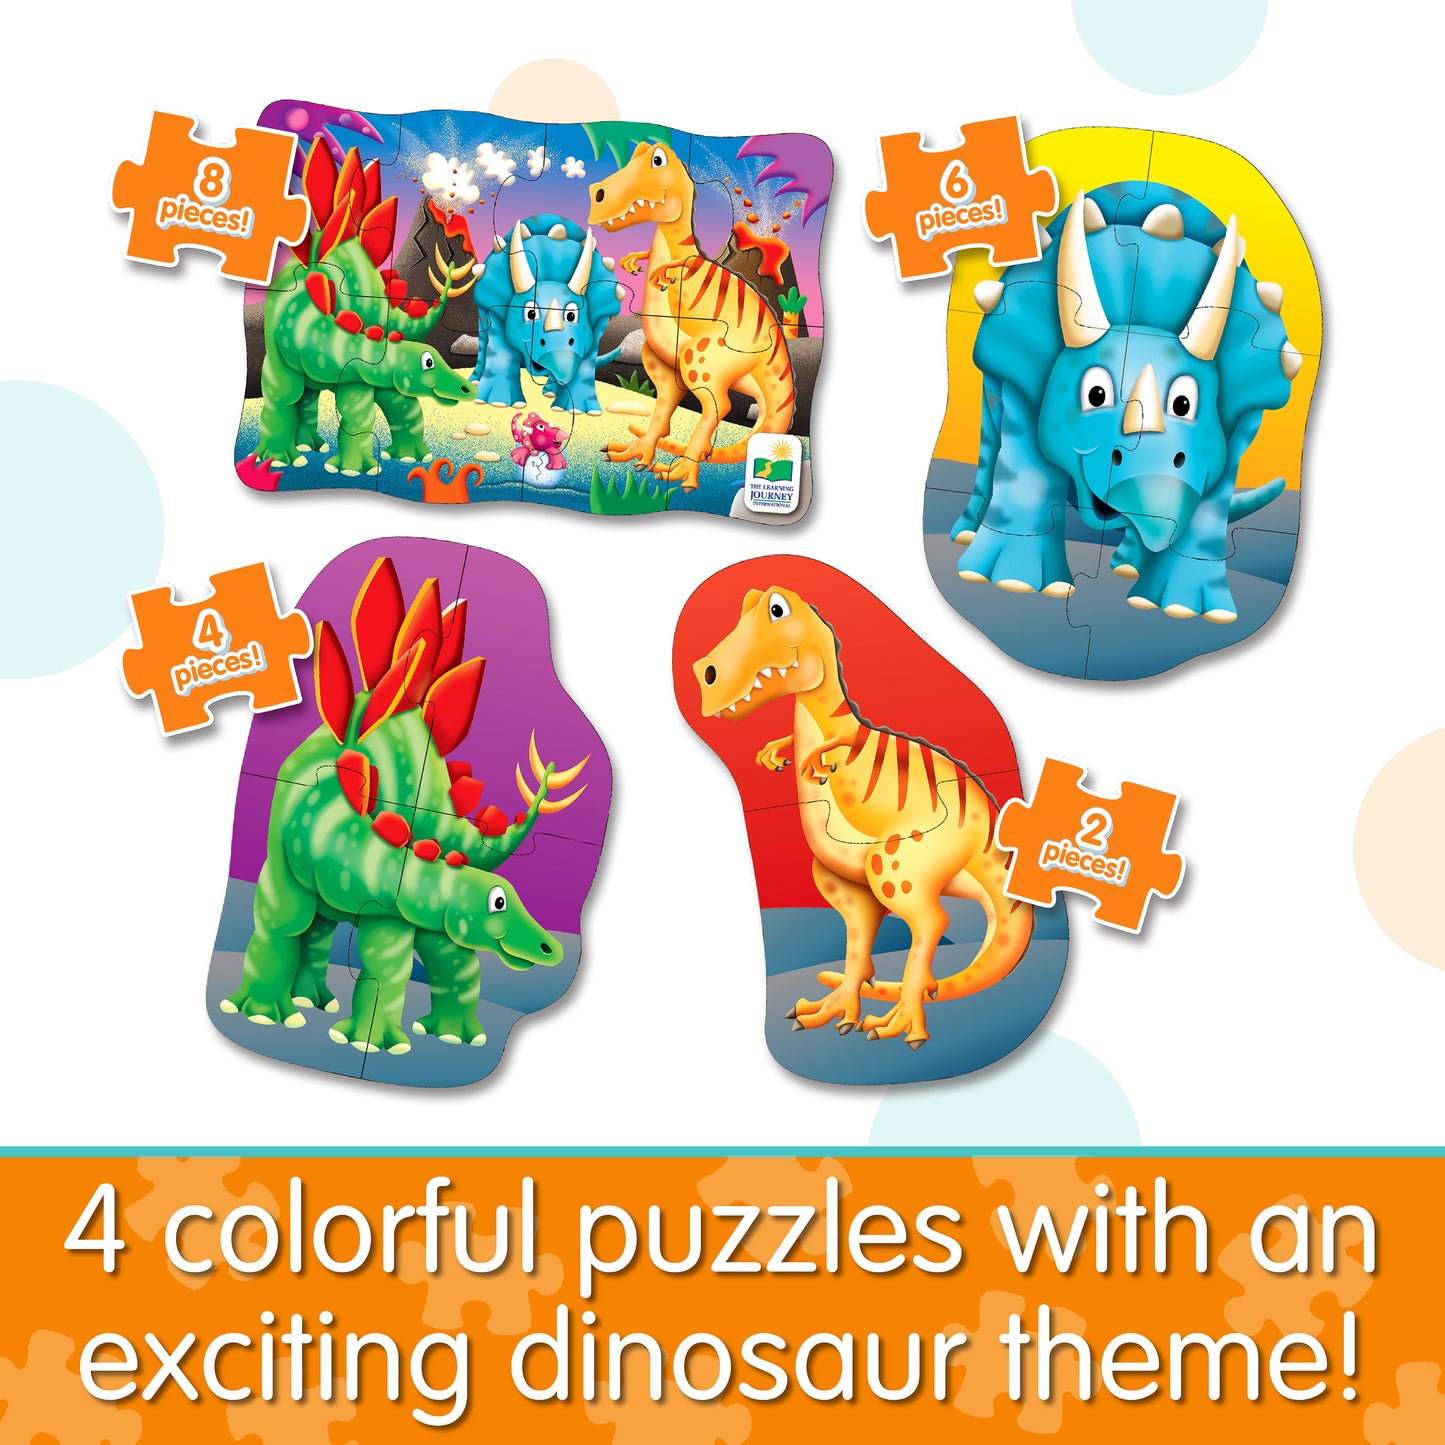 Infographic about 4-In-A-Box Dino Puzzle that says, "4 colorful puzzles with an exciting dinosaur theme!"